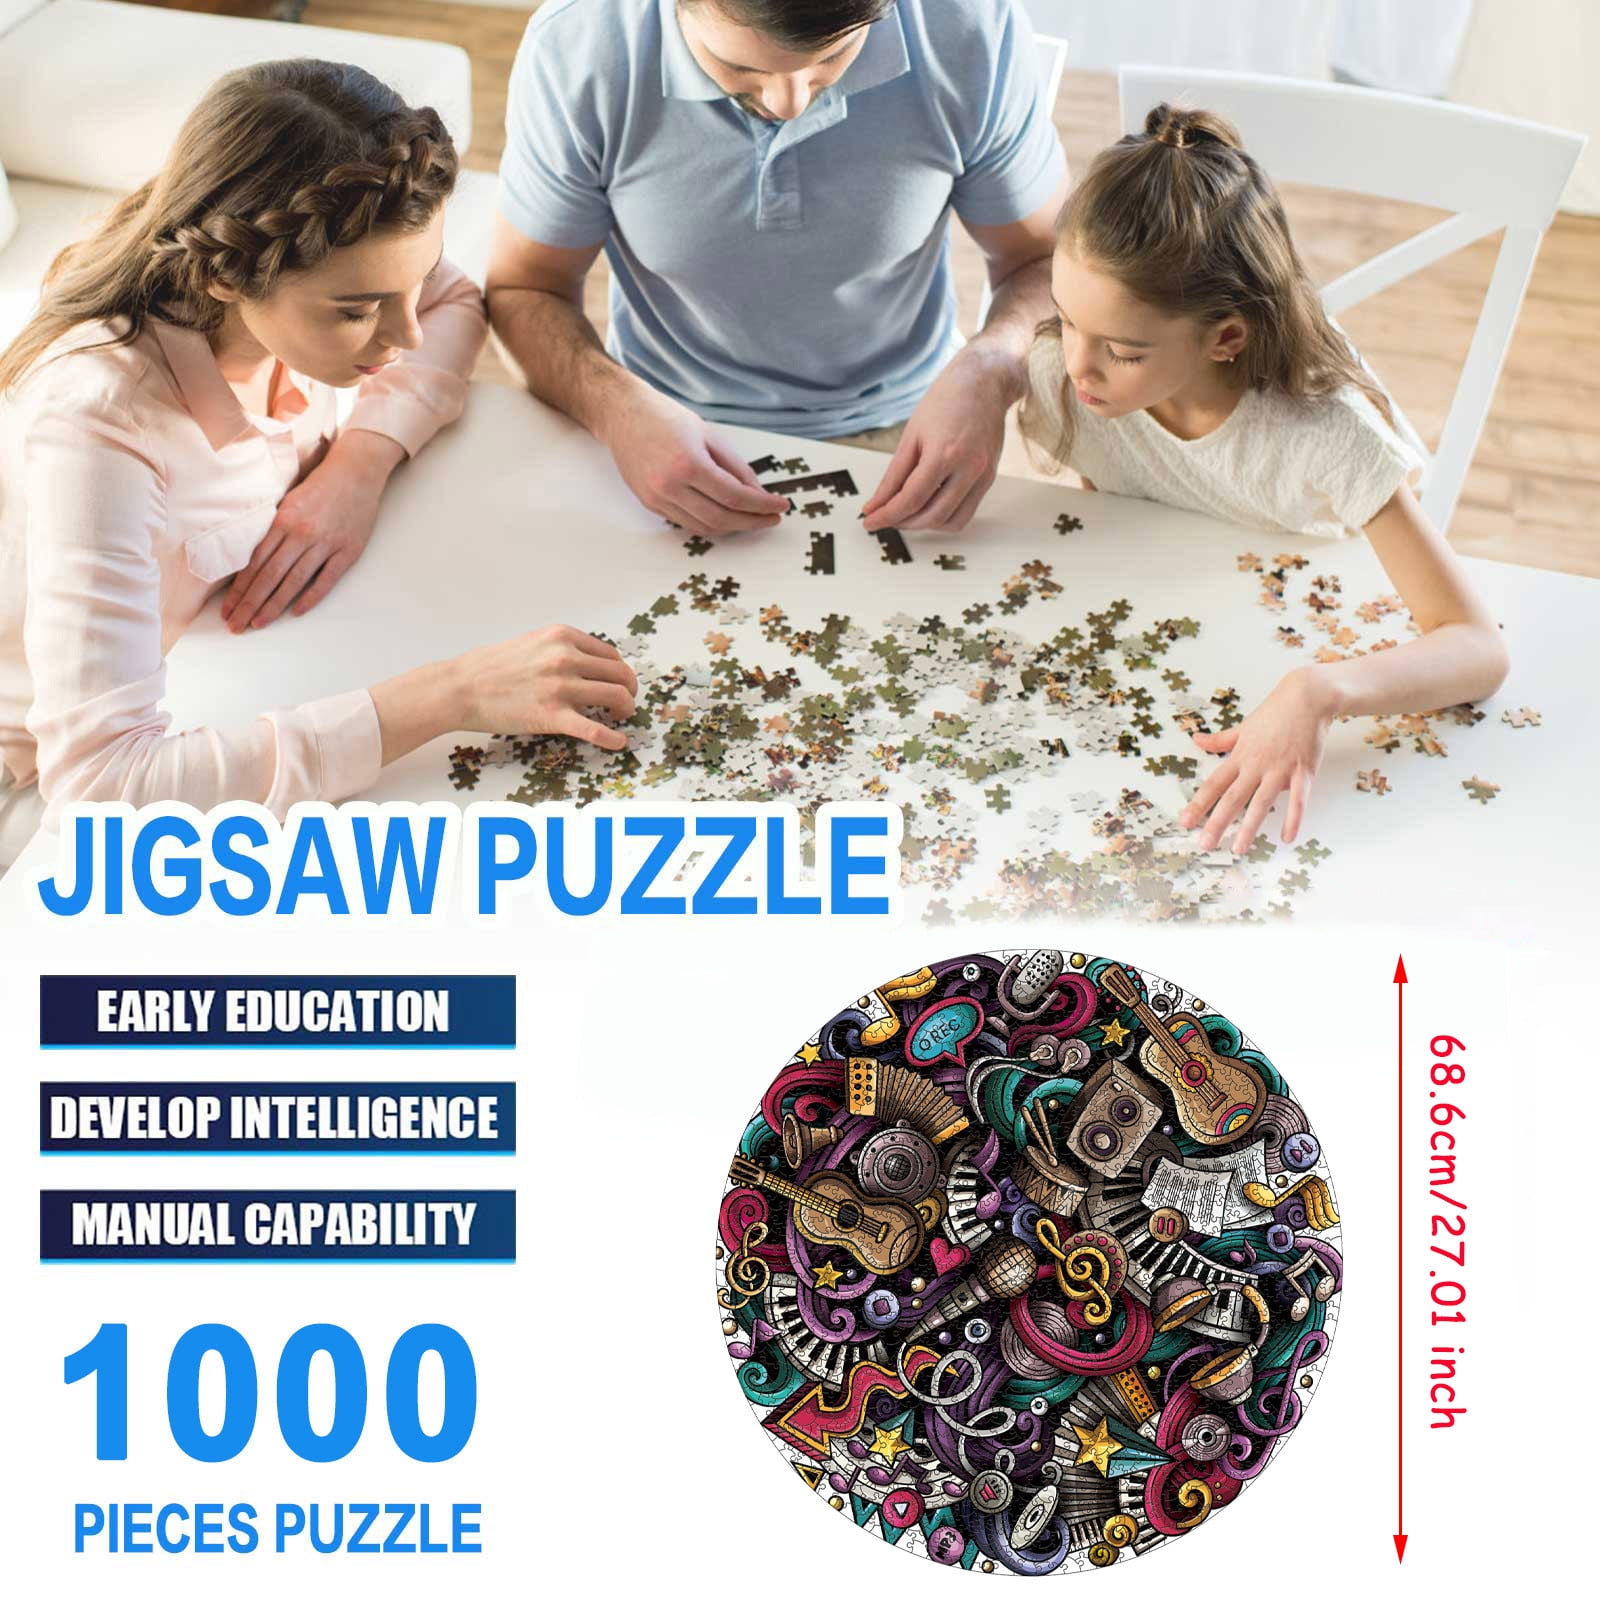 Puzzles for Adults 4000 Piece JigsawLove tree-4000 Aduts Kids Large Puzzles Games Brain IQ Developing Magical Game